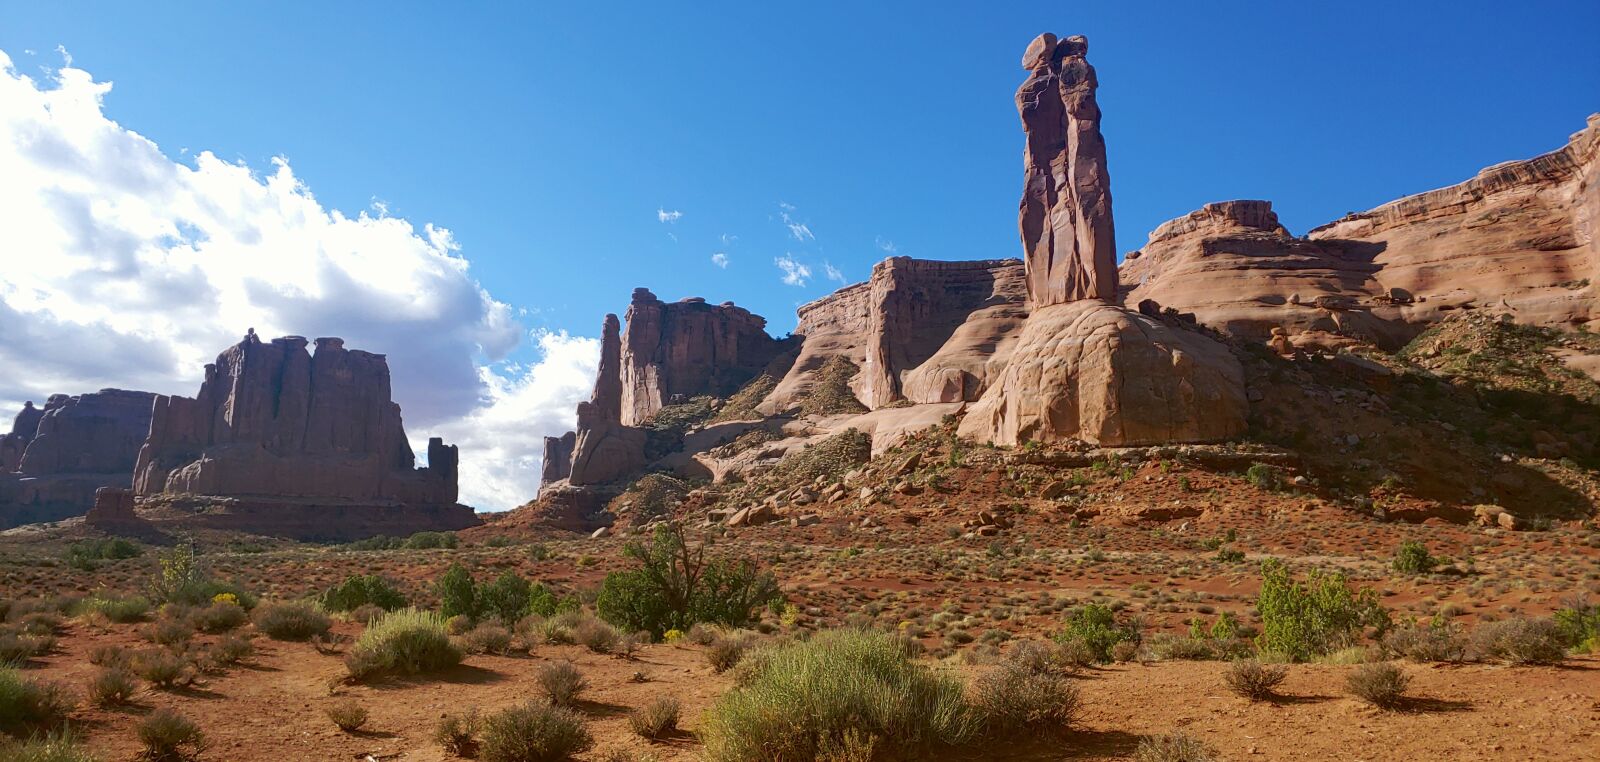 LG LM-V405 sample photo. Arches national park, rock photography